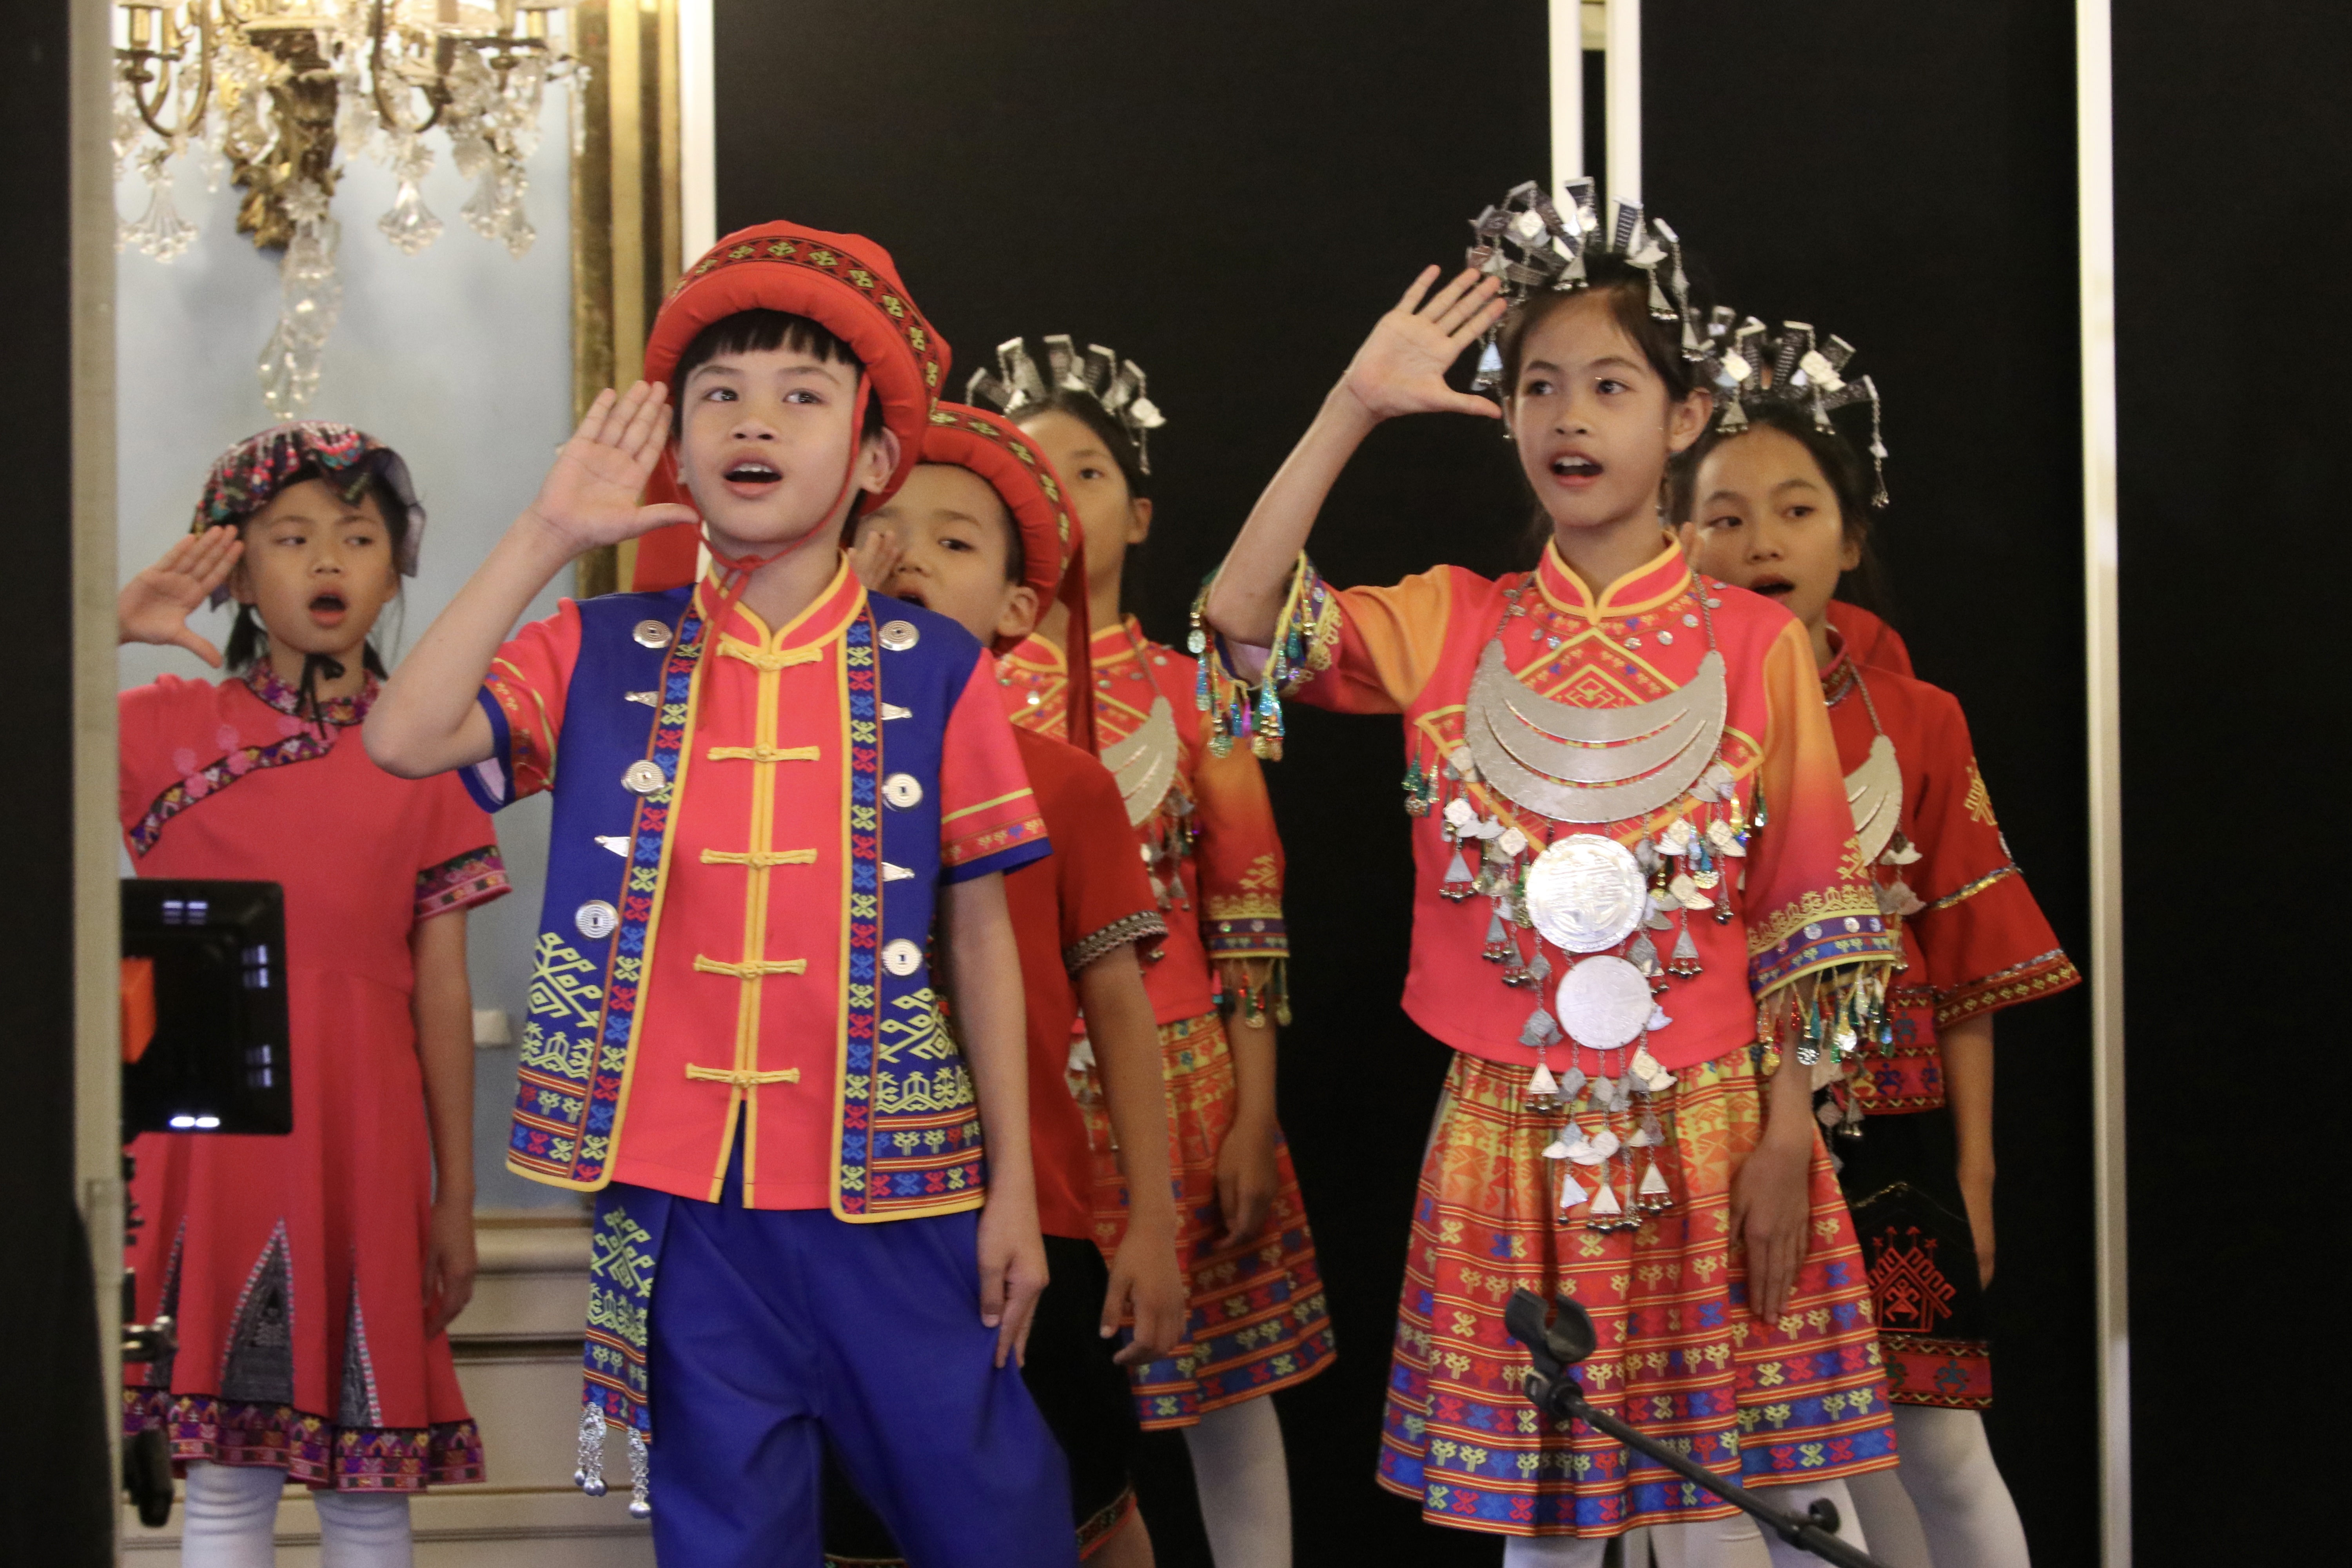 Members of the Wuzhishan Li and Miao Children's Choir from Wuzhishan, Hainan Province perform during a concert in Paris, France. /Photo provided to CGTN